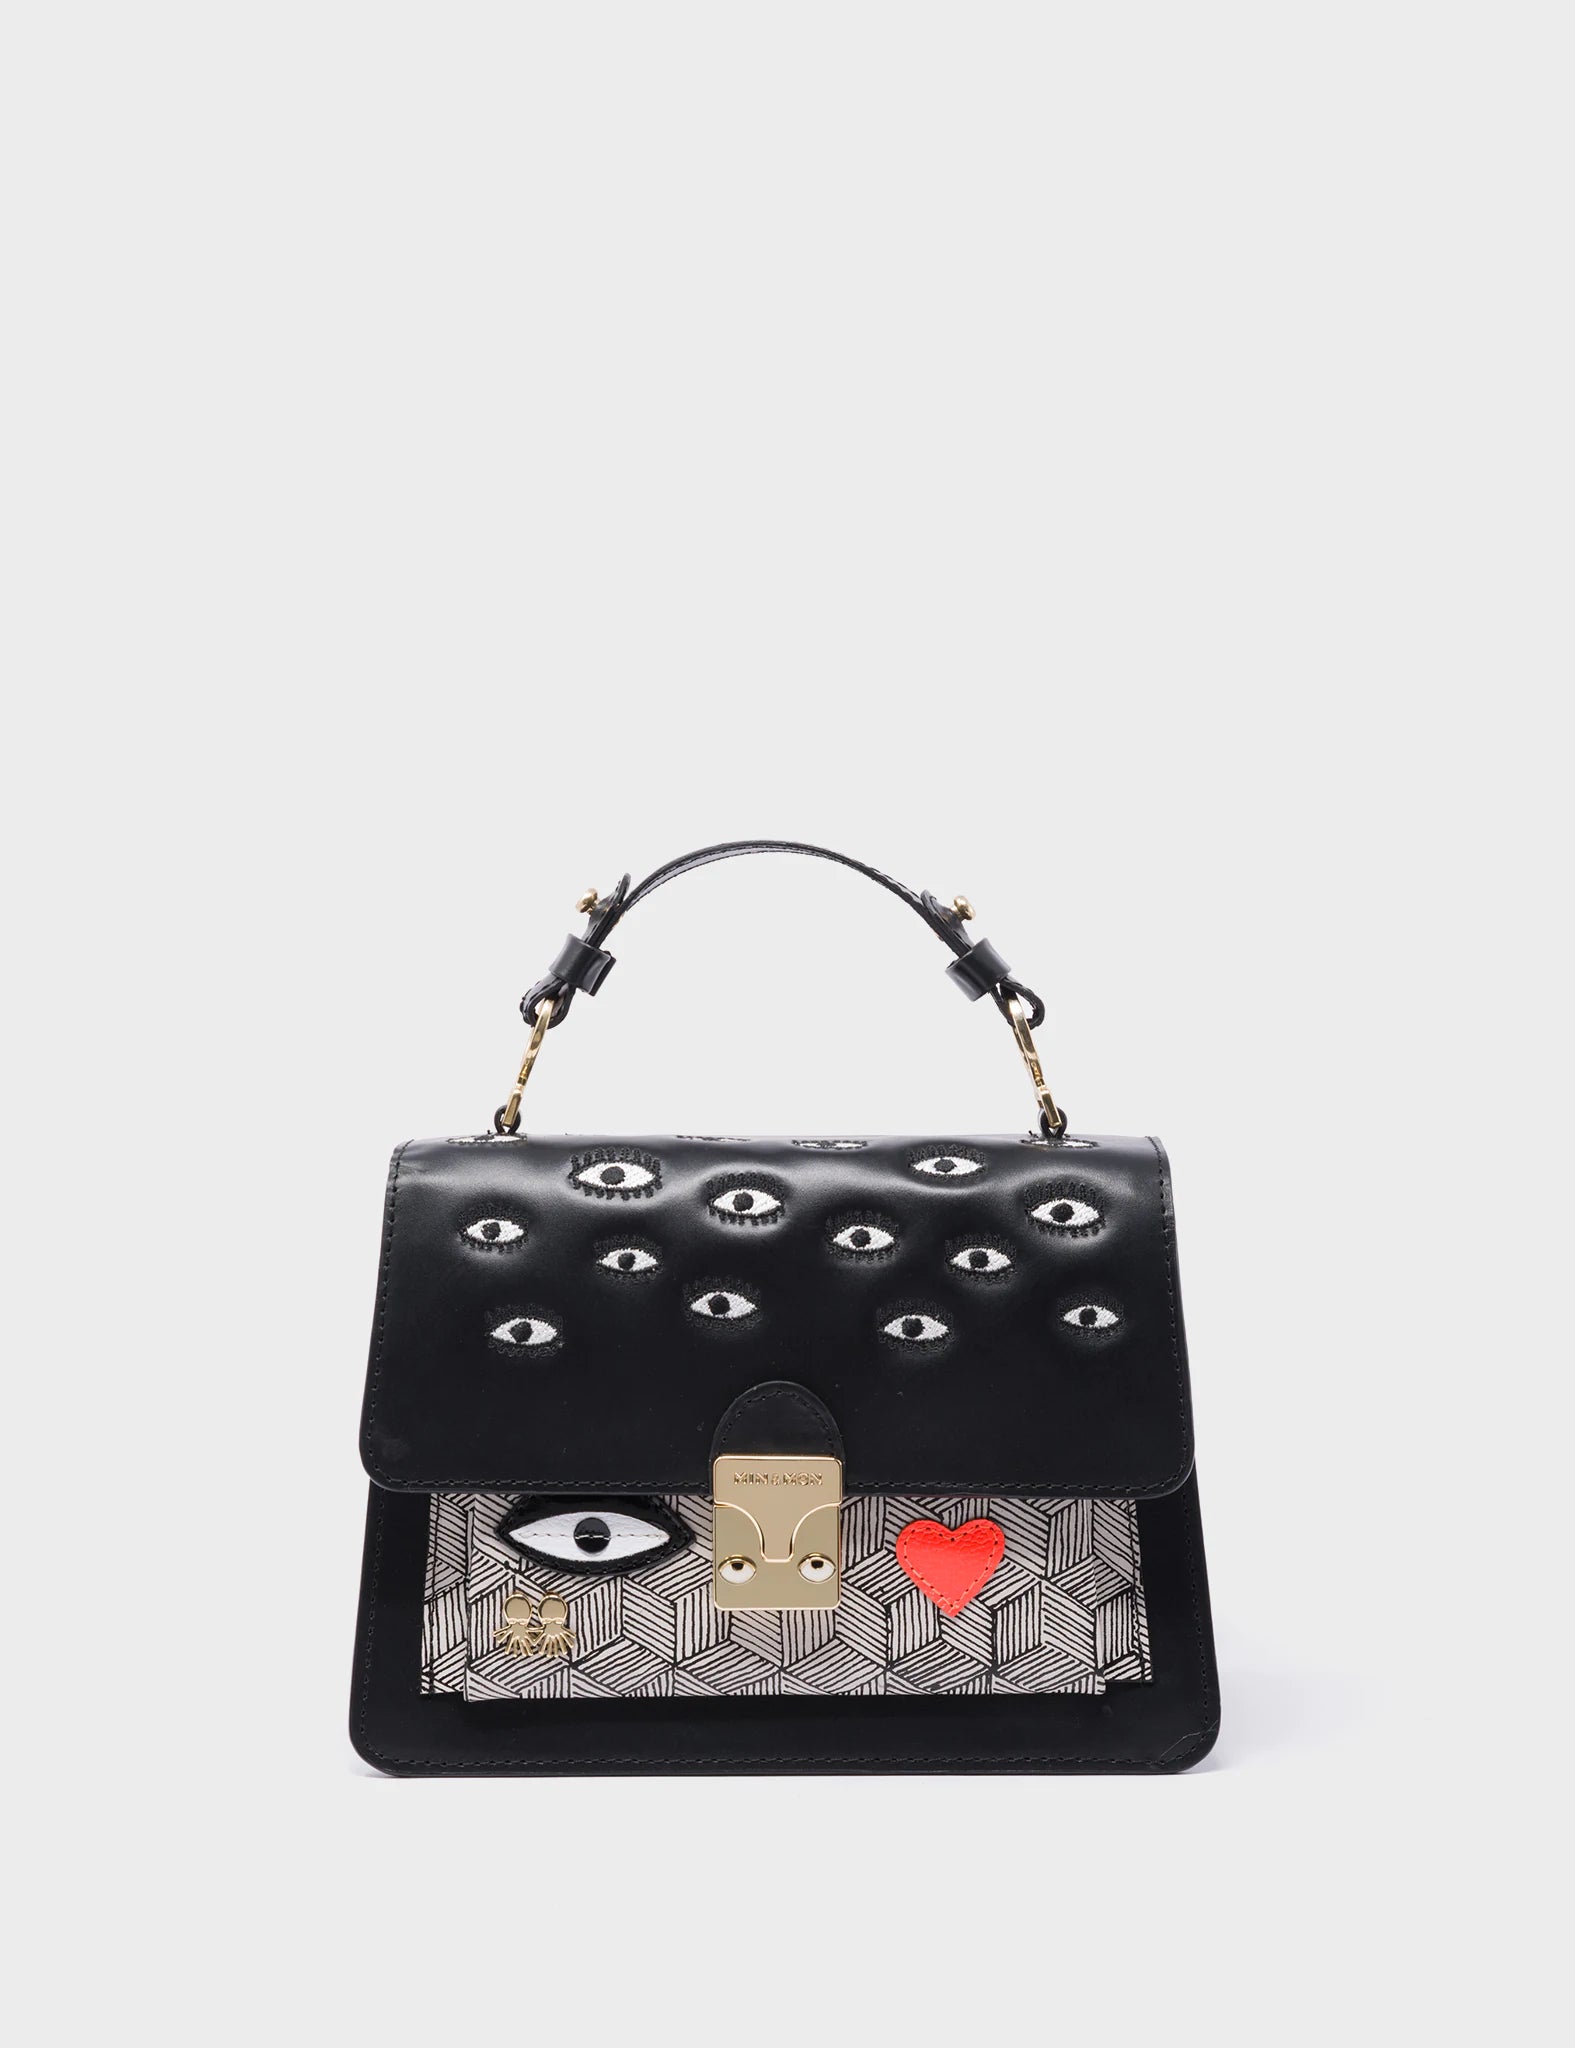 Silas Black Small Leather Crossbody Bag - Eyes Embroidery - Front 